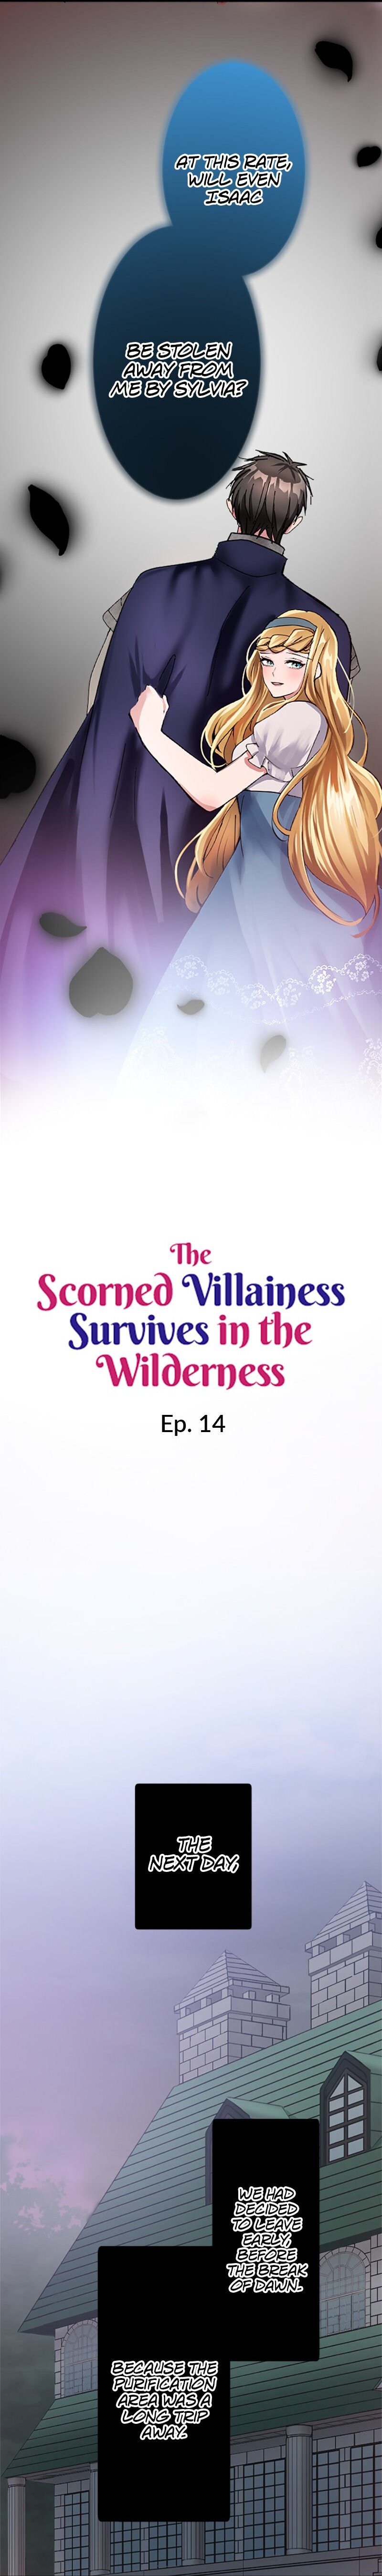 The Scorned Villainess Survives In The Wilderness - Page 2